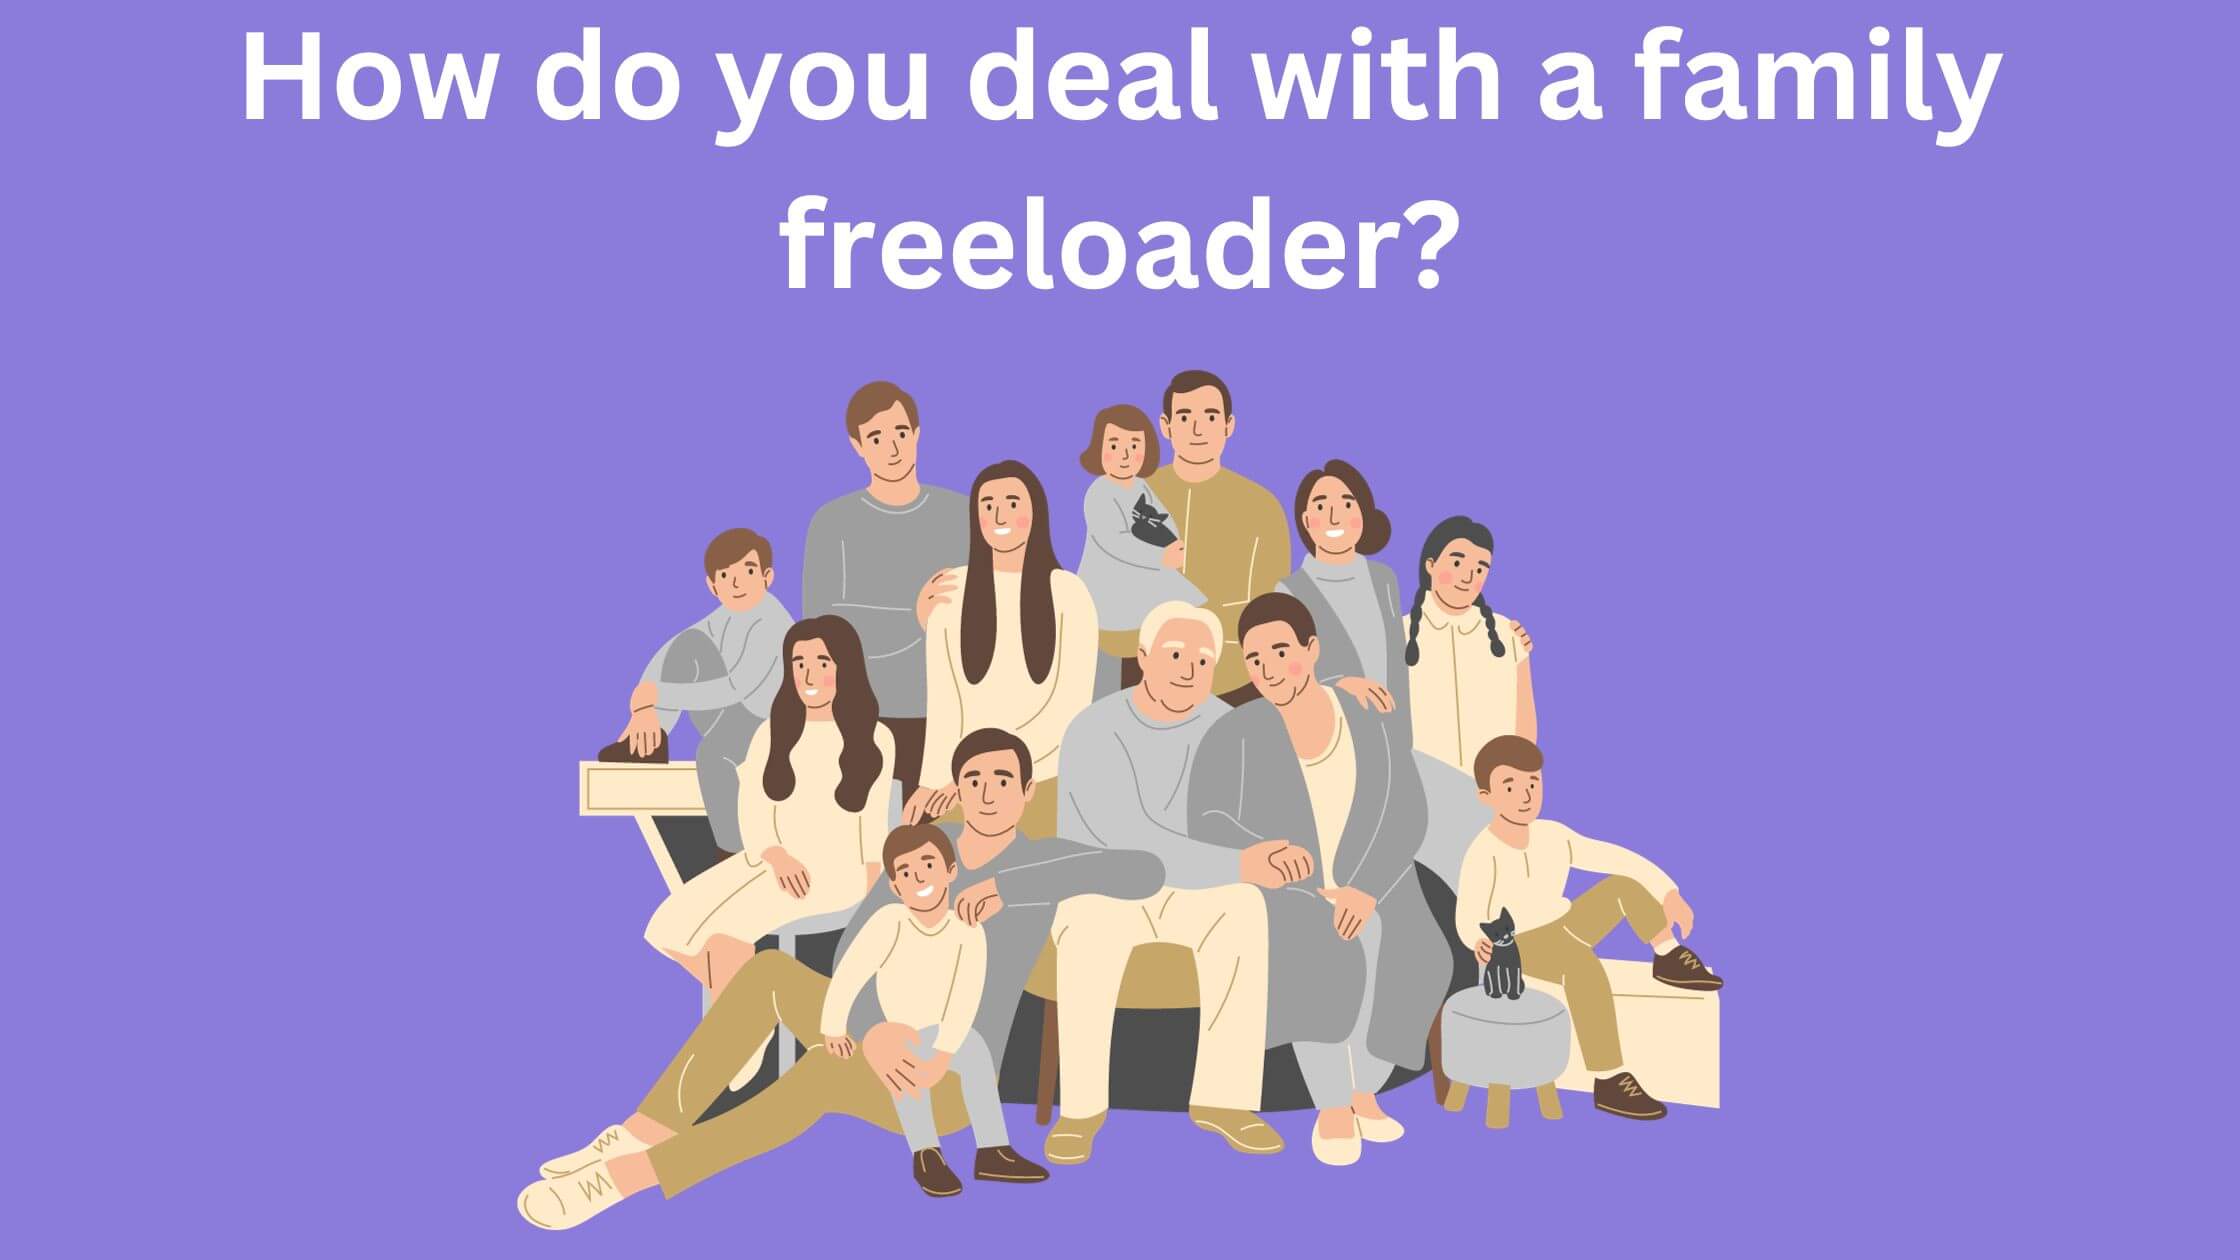 How do you deal with a family freeloader?